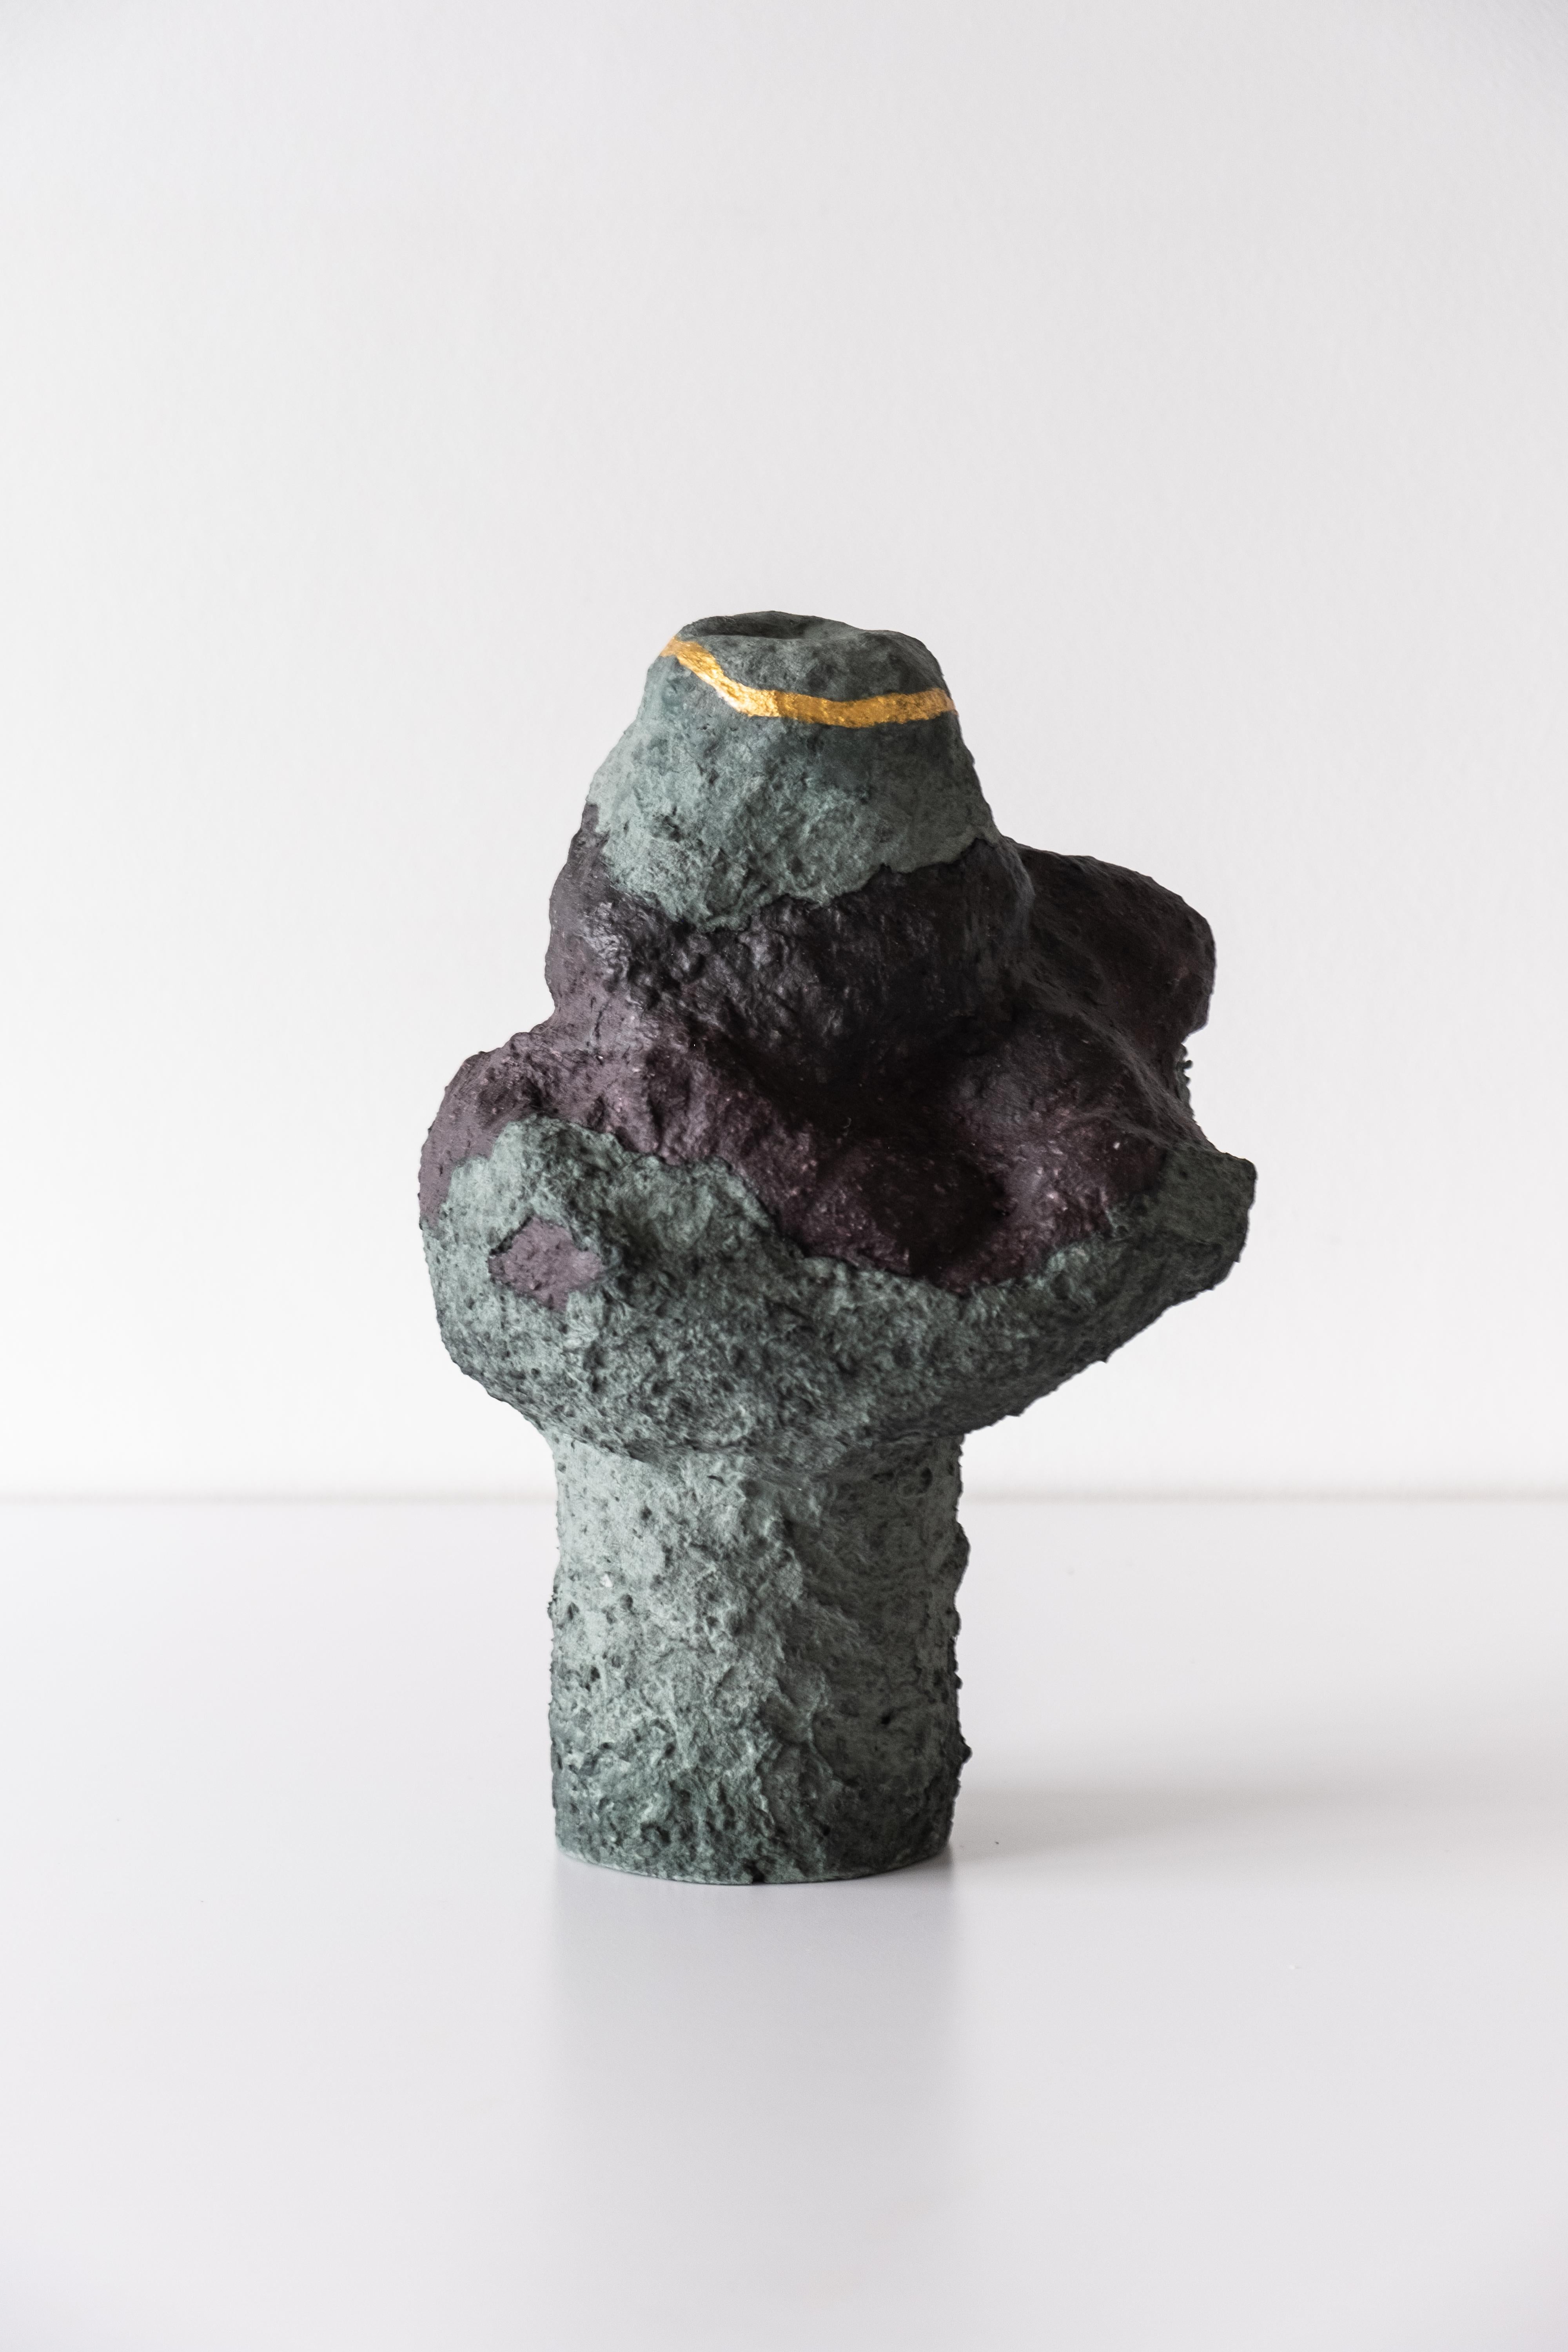 Barbican Vase No.2 by A Space
Dimensions: D22,86 x W20,32 x H30,48cm
Materials: Misc recycled.

The design duo conceived the Barbican Collection over the spring/summer of 2020 while on lockdown at the eponymous London architectural and cultural